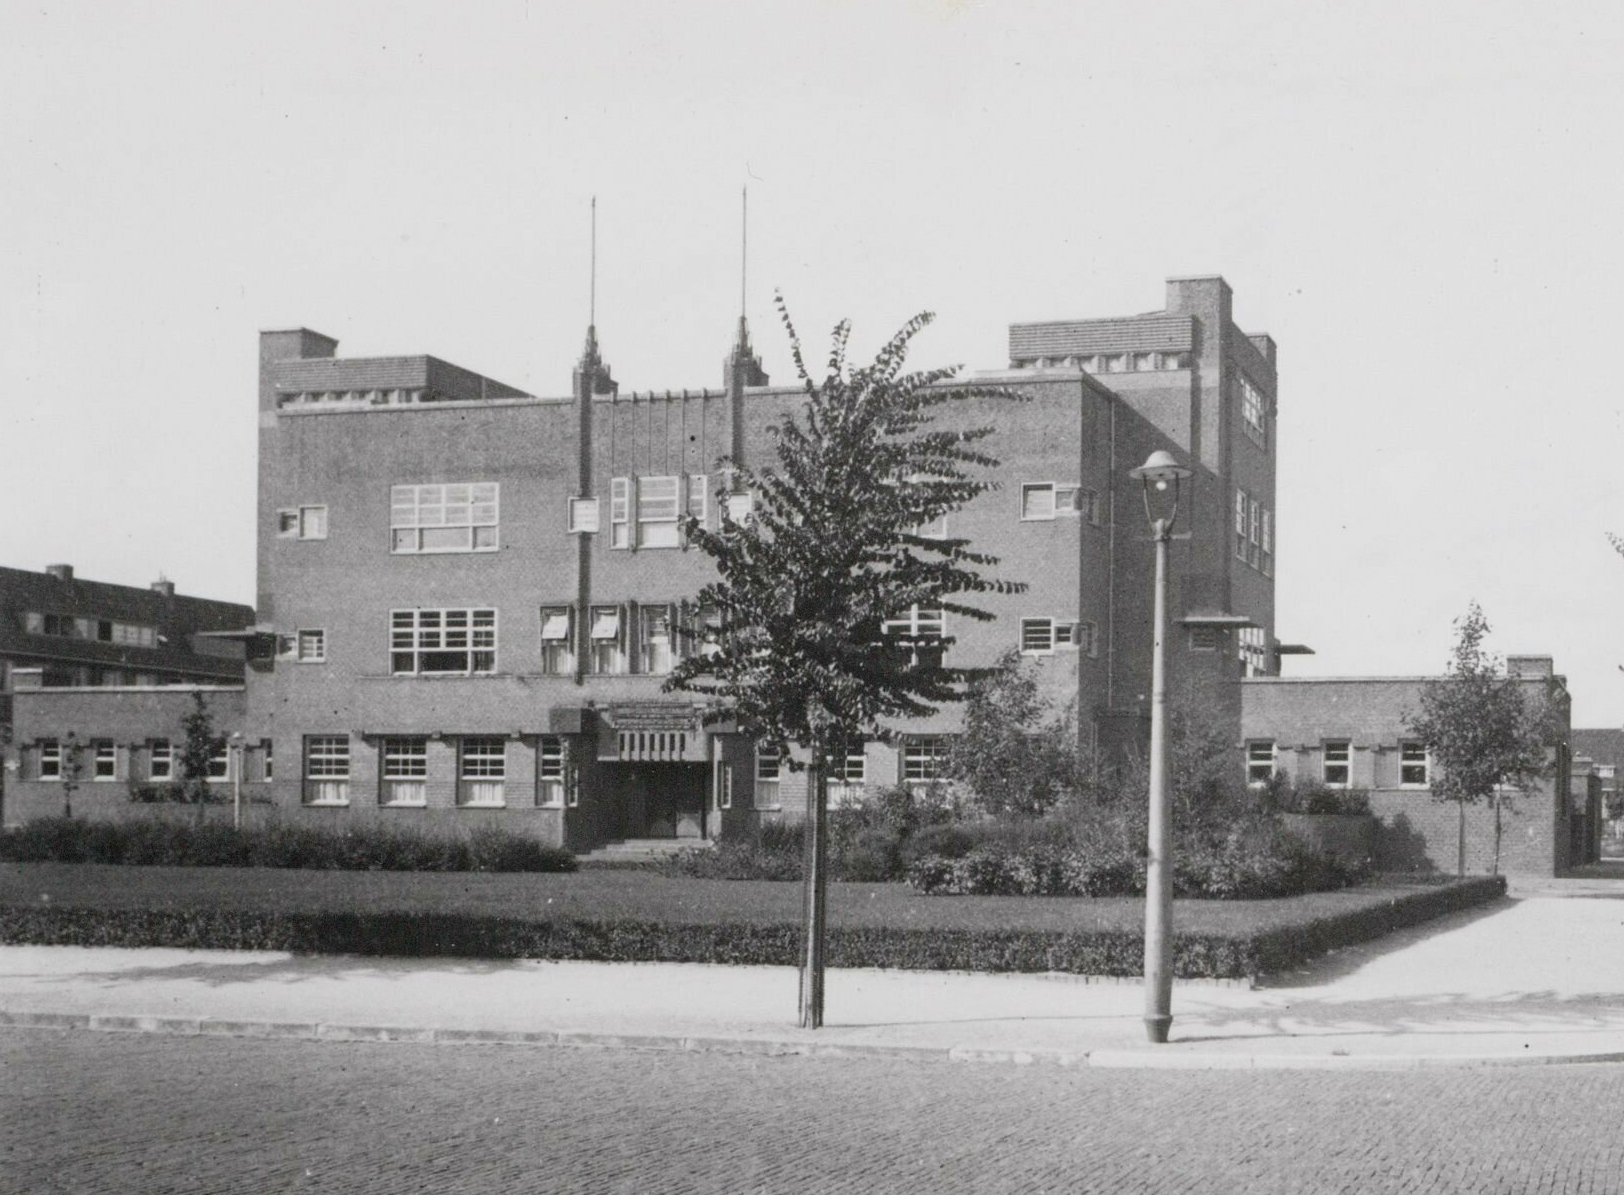 The Zentrallstelle building in use as a Christian HBS school. Amsterdam, 1932.